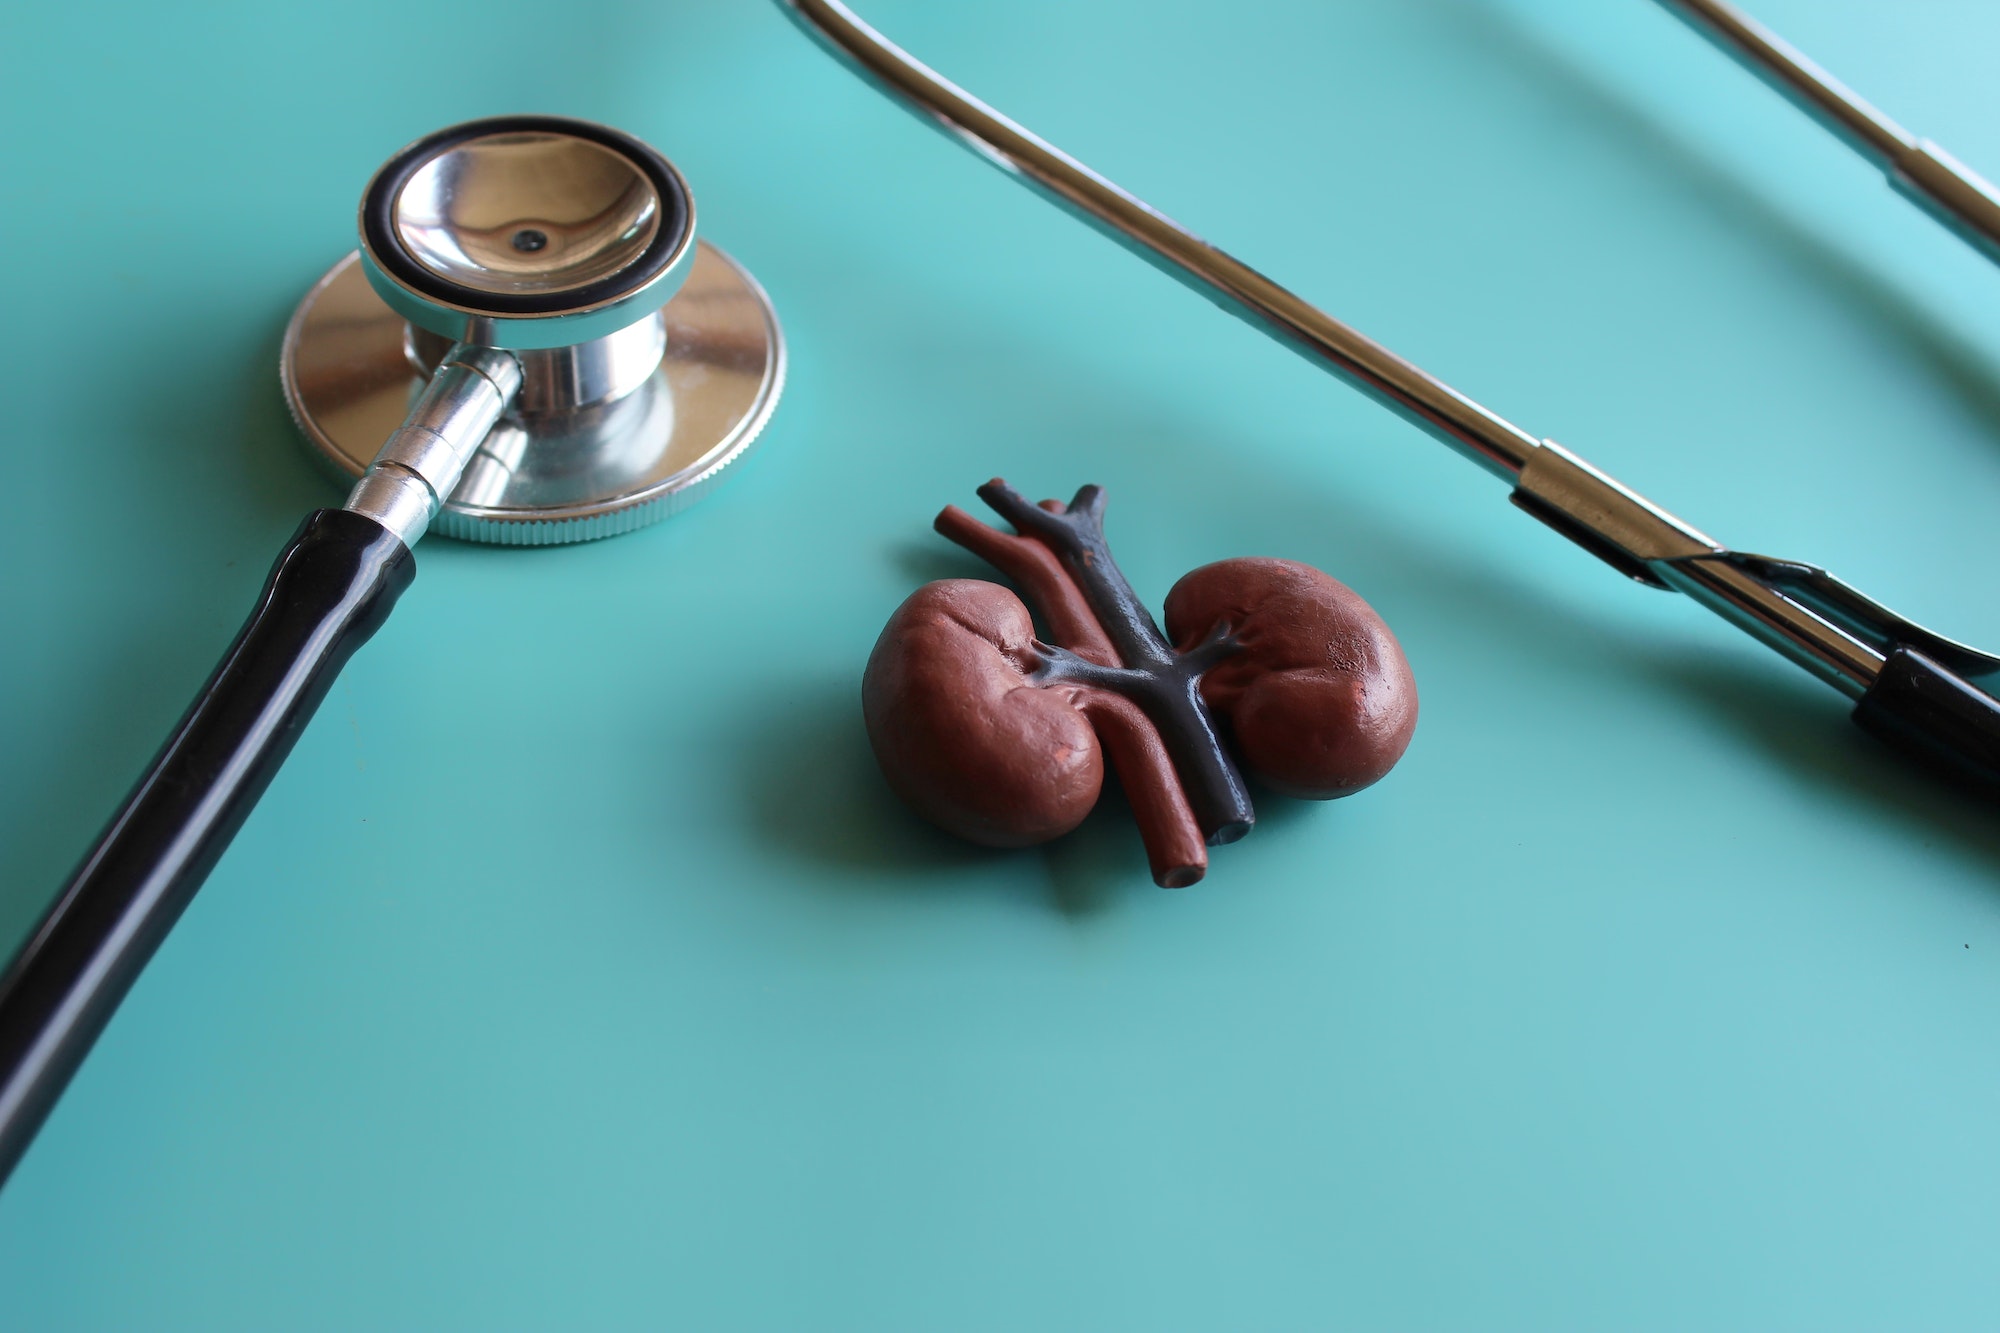 Close up image of kidney model and stethoscope on light green background